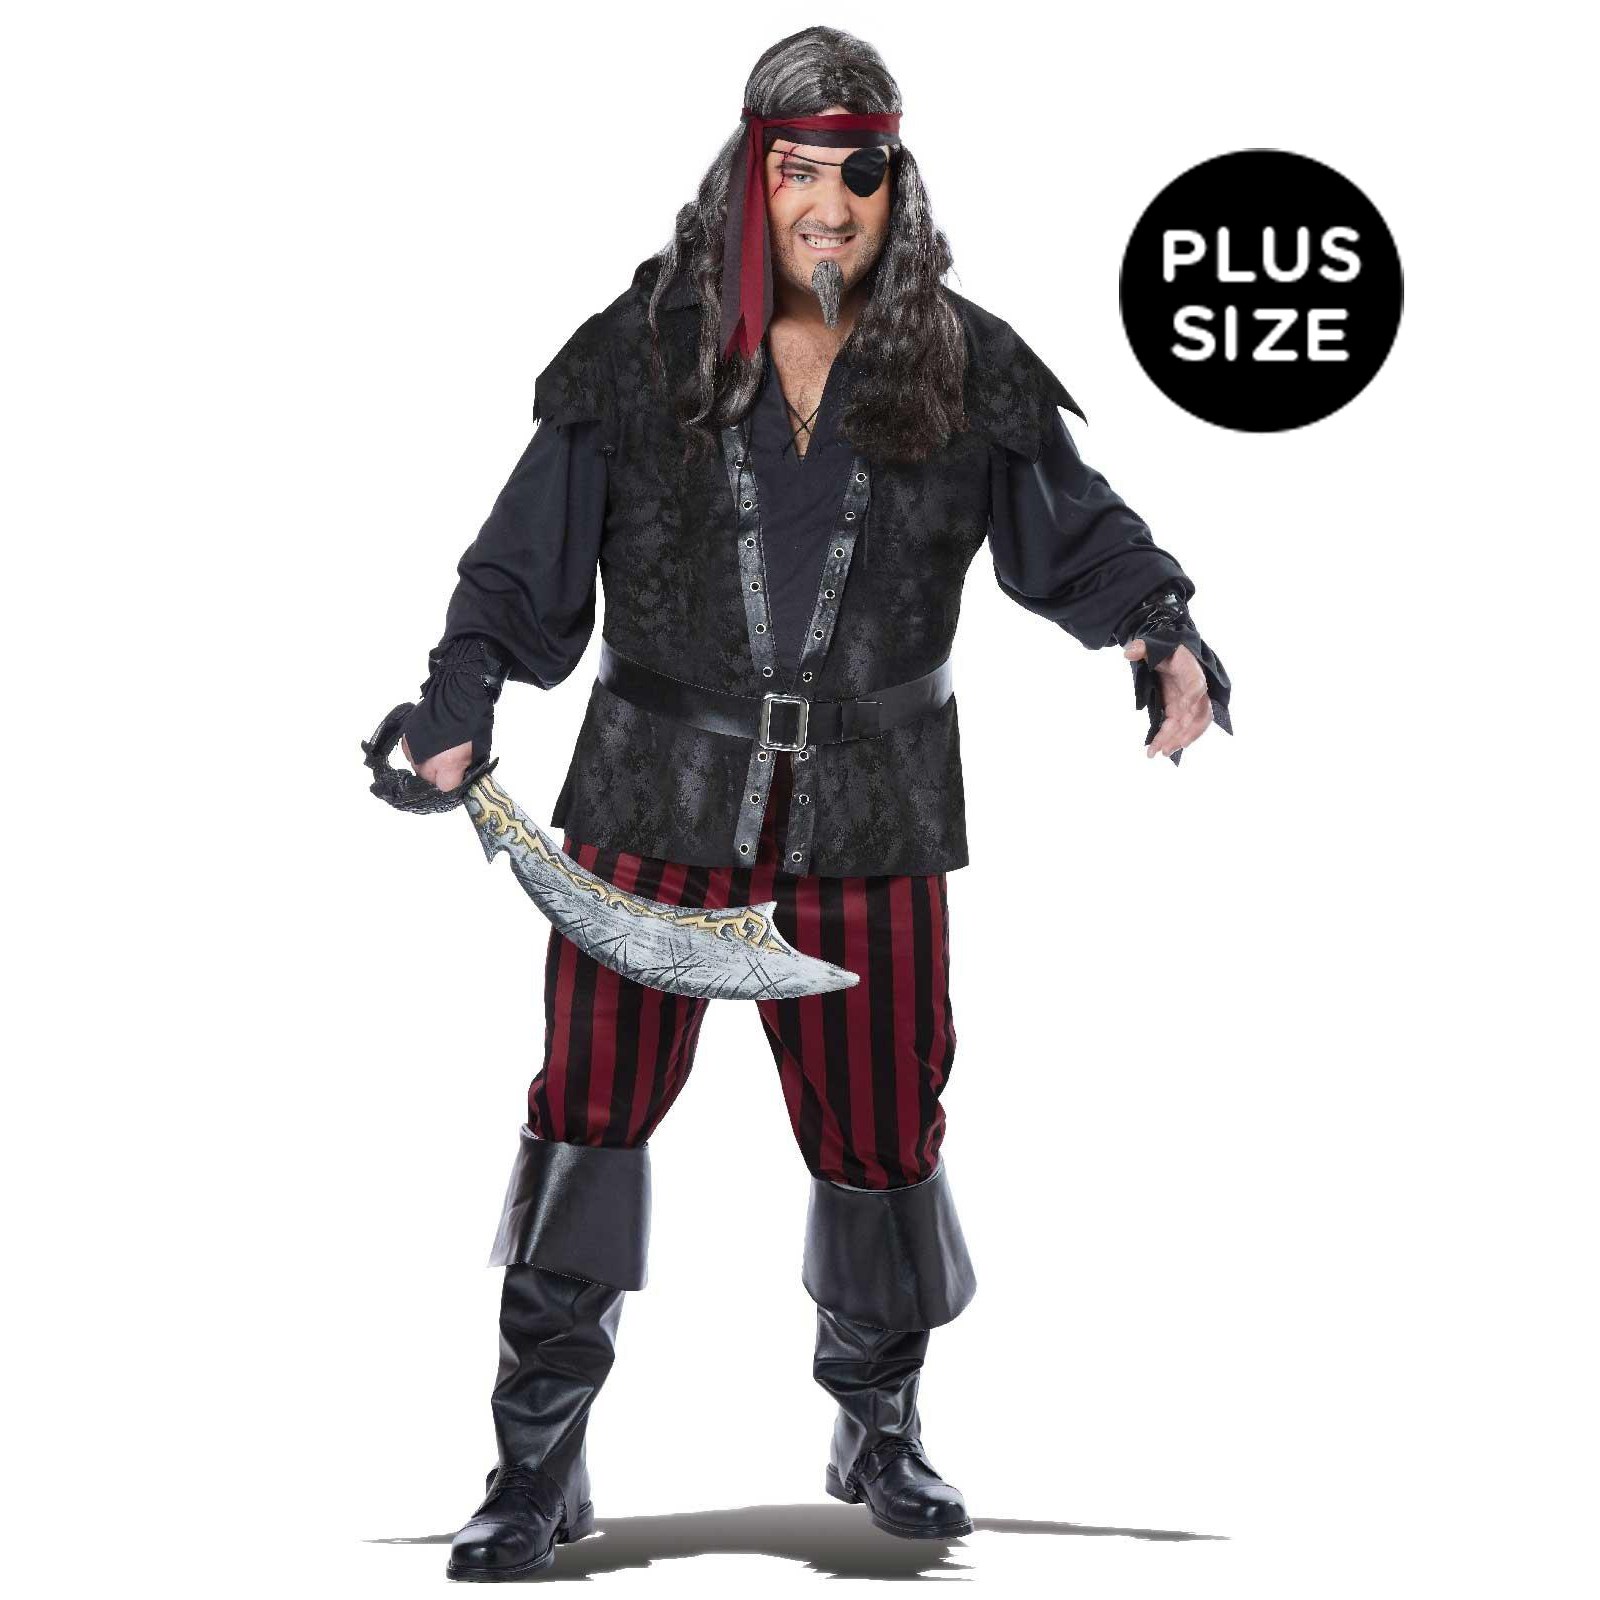 Ruthless Pirate Rogue Adult Plus Size Costume